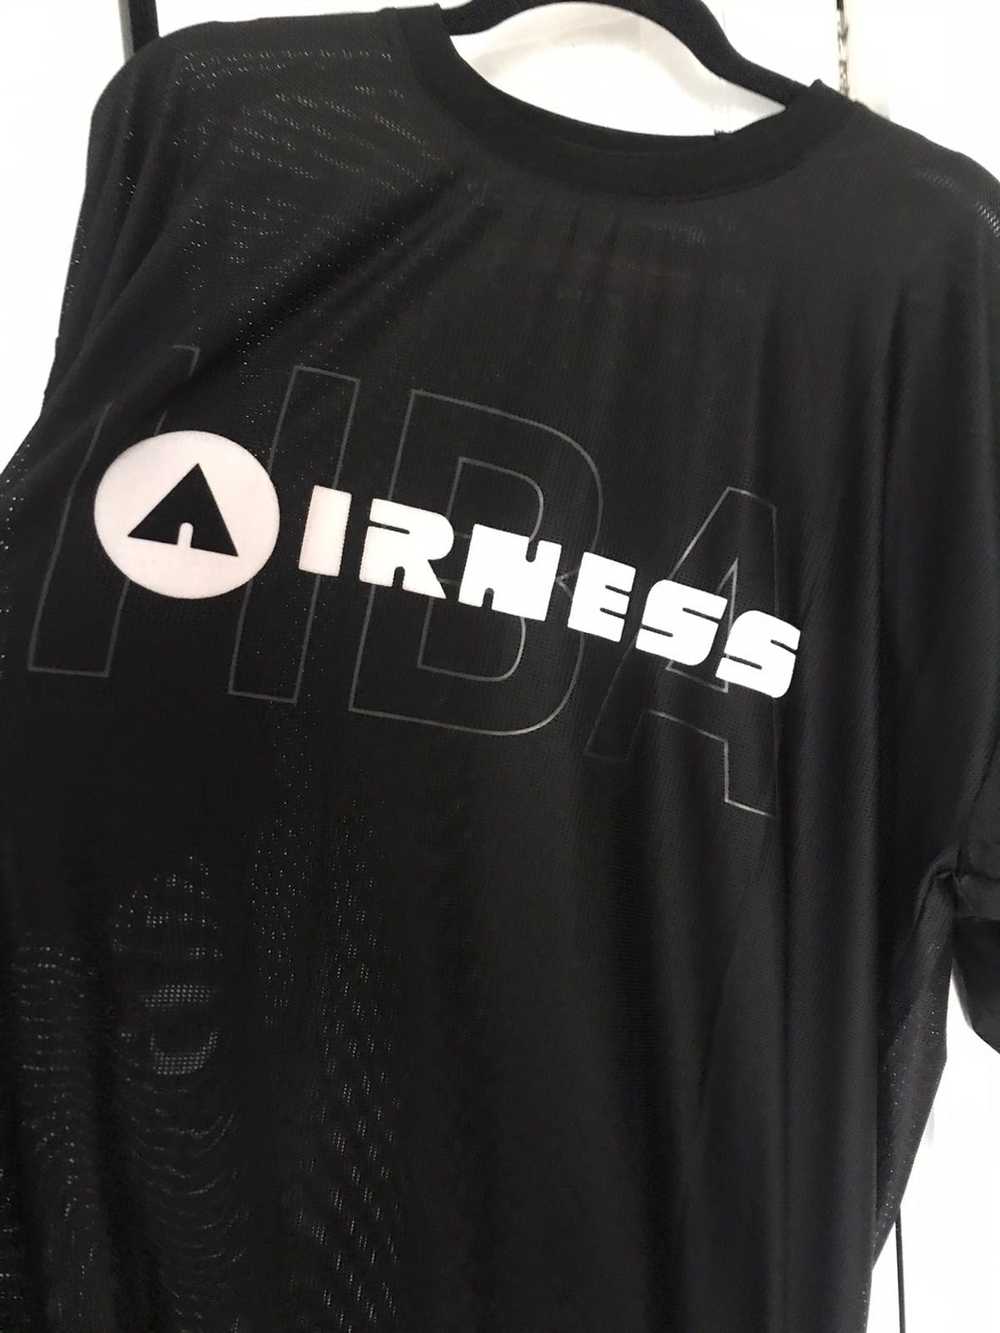 Hood By Air Hood By Air Airness Jersey - image 2